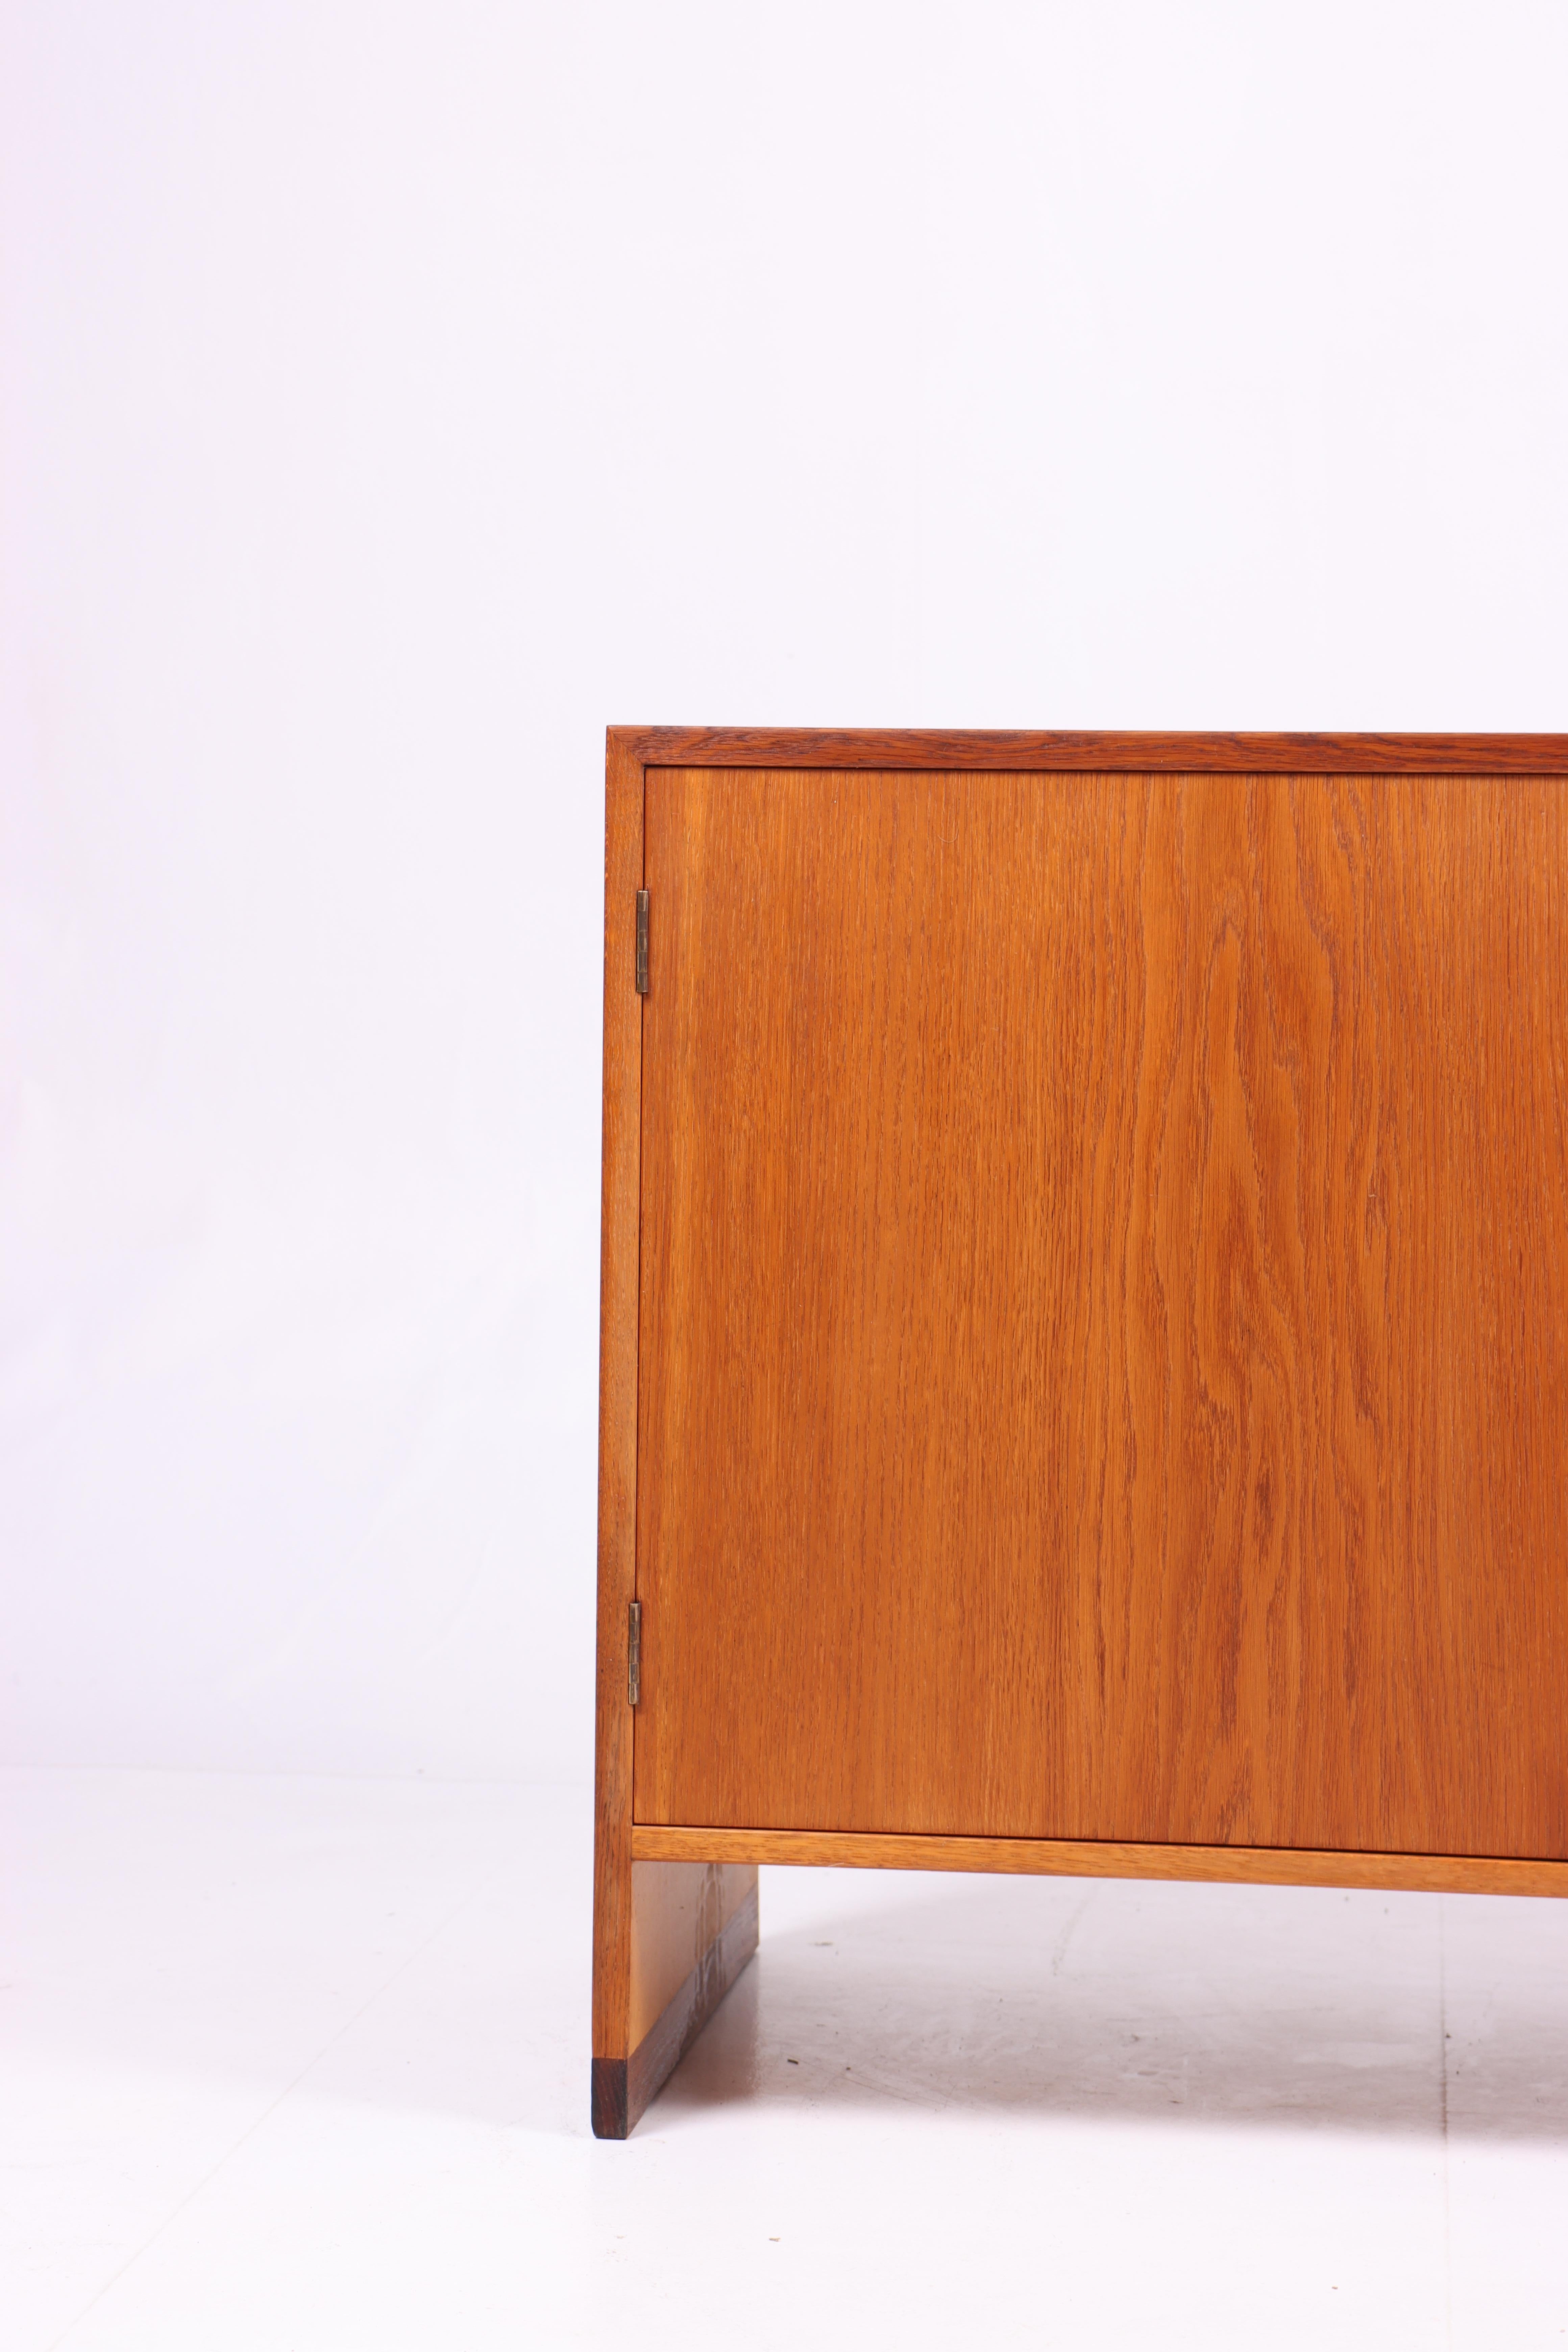 Cabinet in oak. Designed by Hans J Wegner for RY Moebler cabinetmakers in the late 1950s.